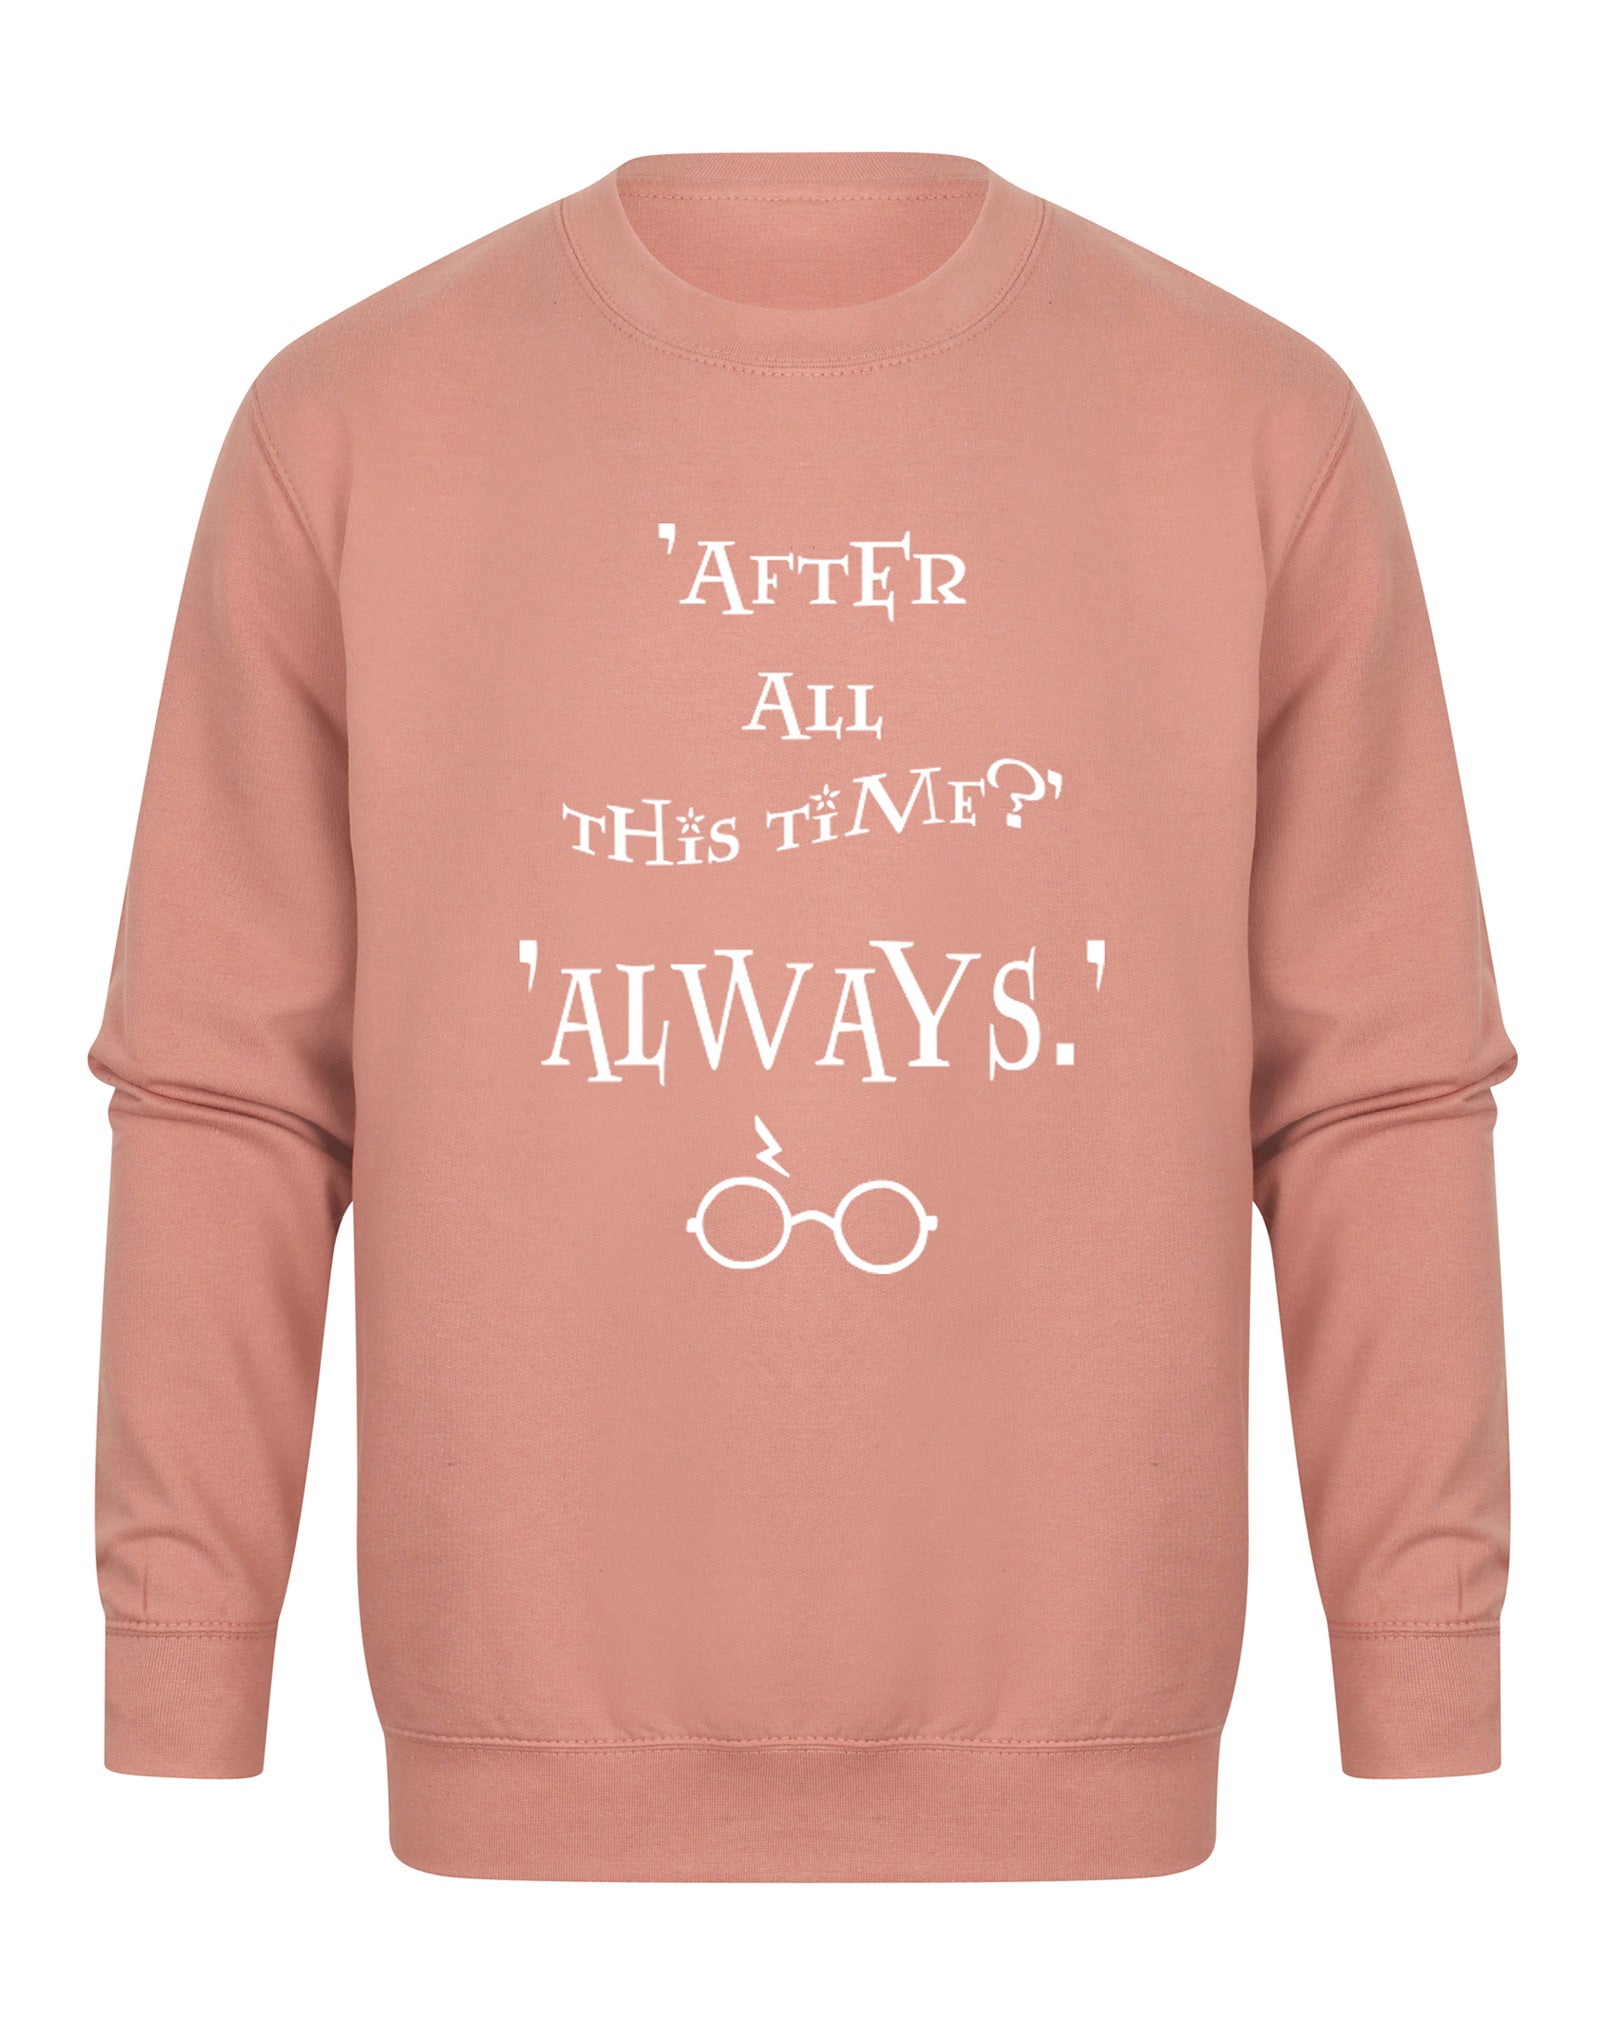 After All This Time, Always - Unisex Fit Sweater - Dusky Pink-Leoras Attic-Kelham Print